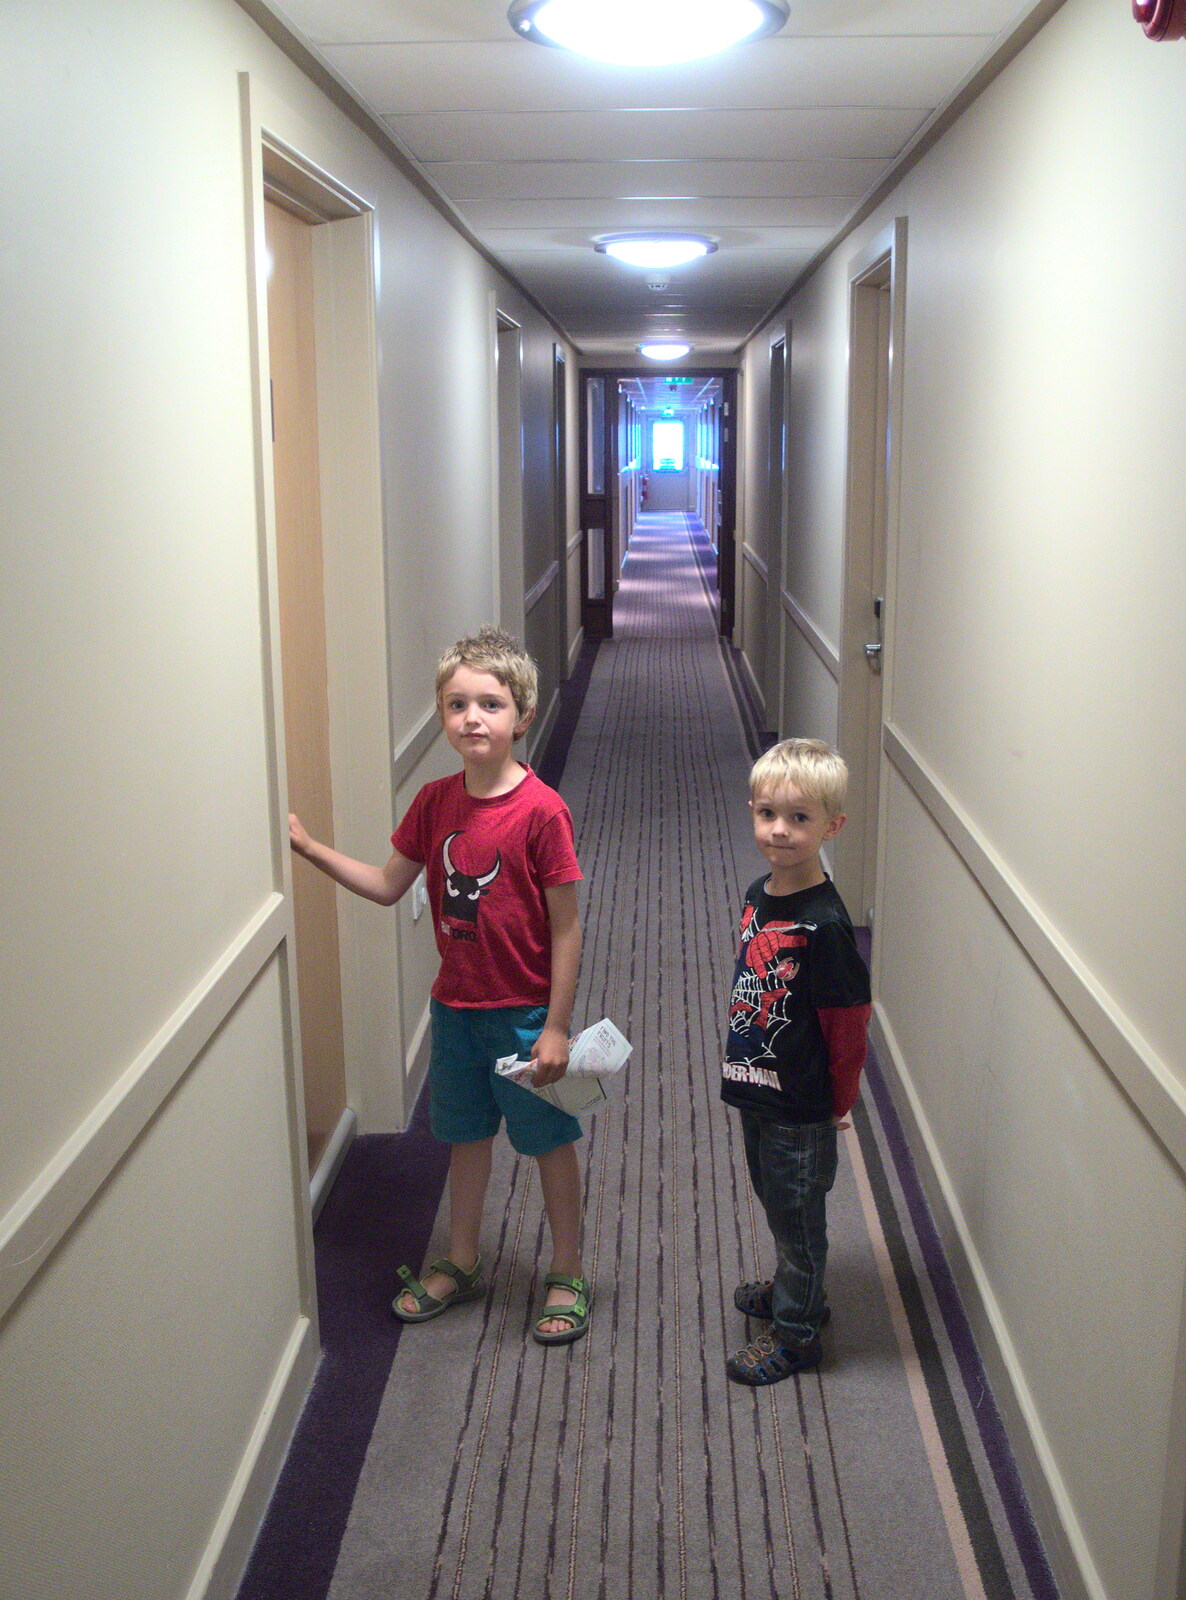 The boys enter the room from Camping With Sean, Ashburton, Devon - 8th August 2016